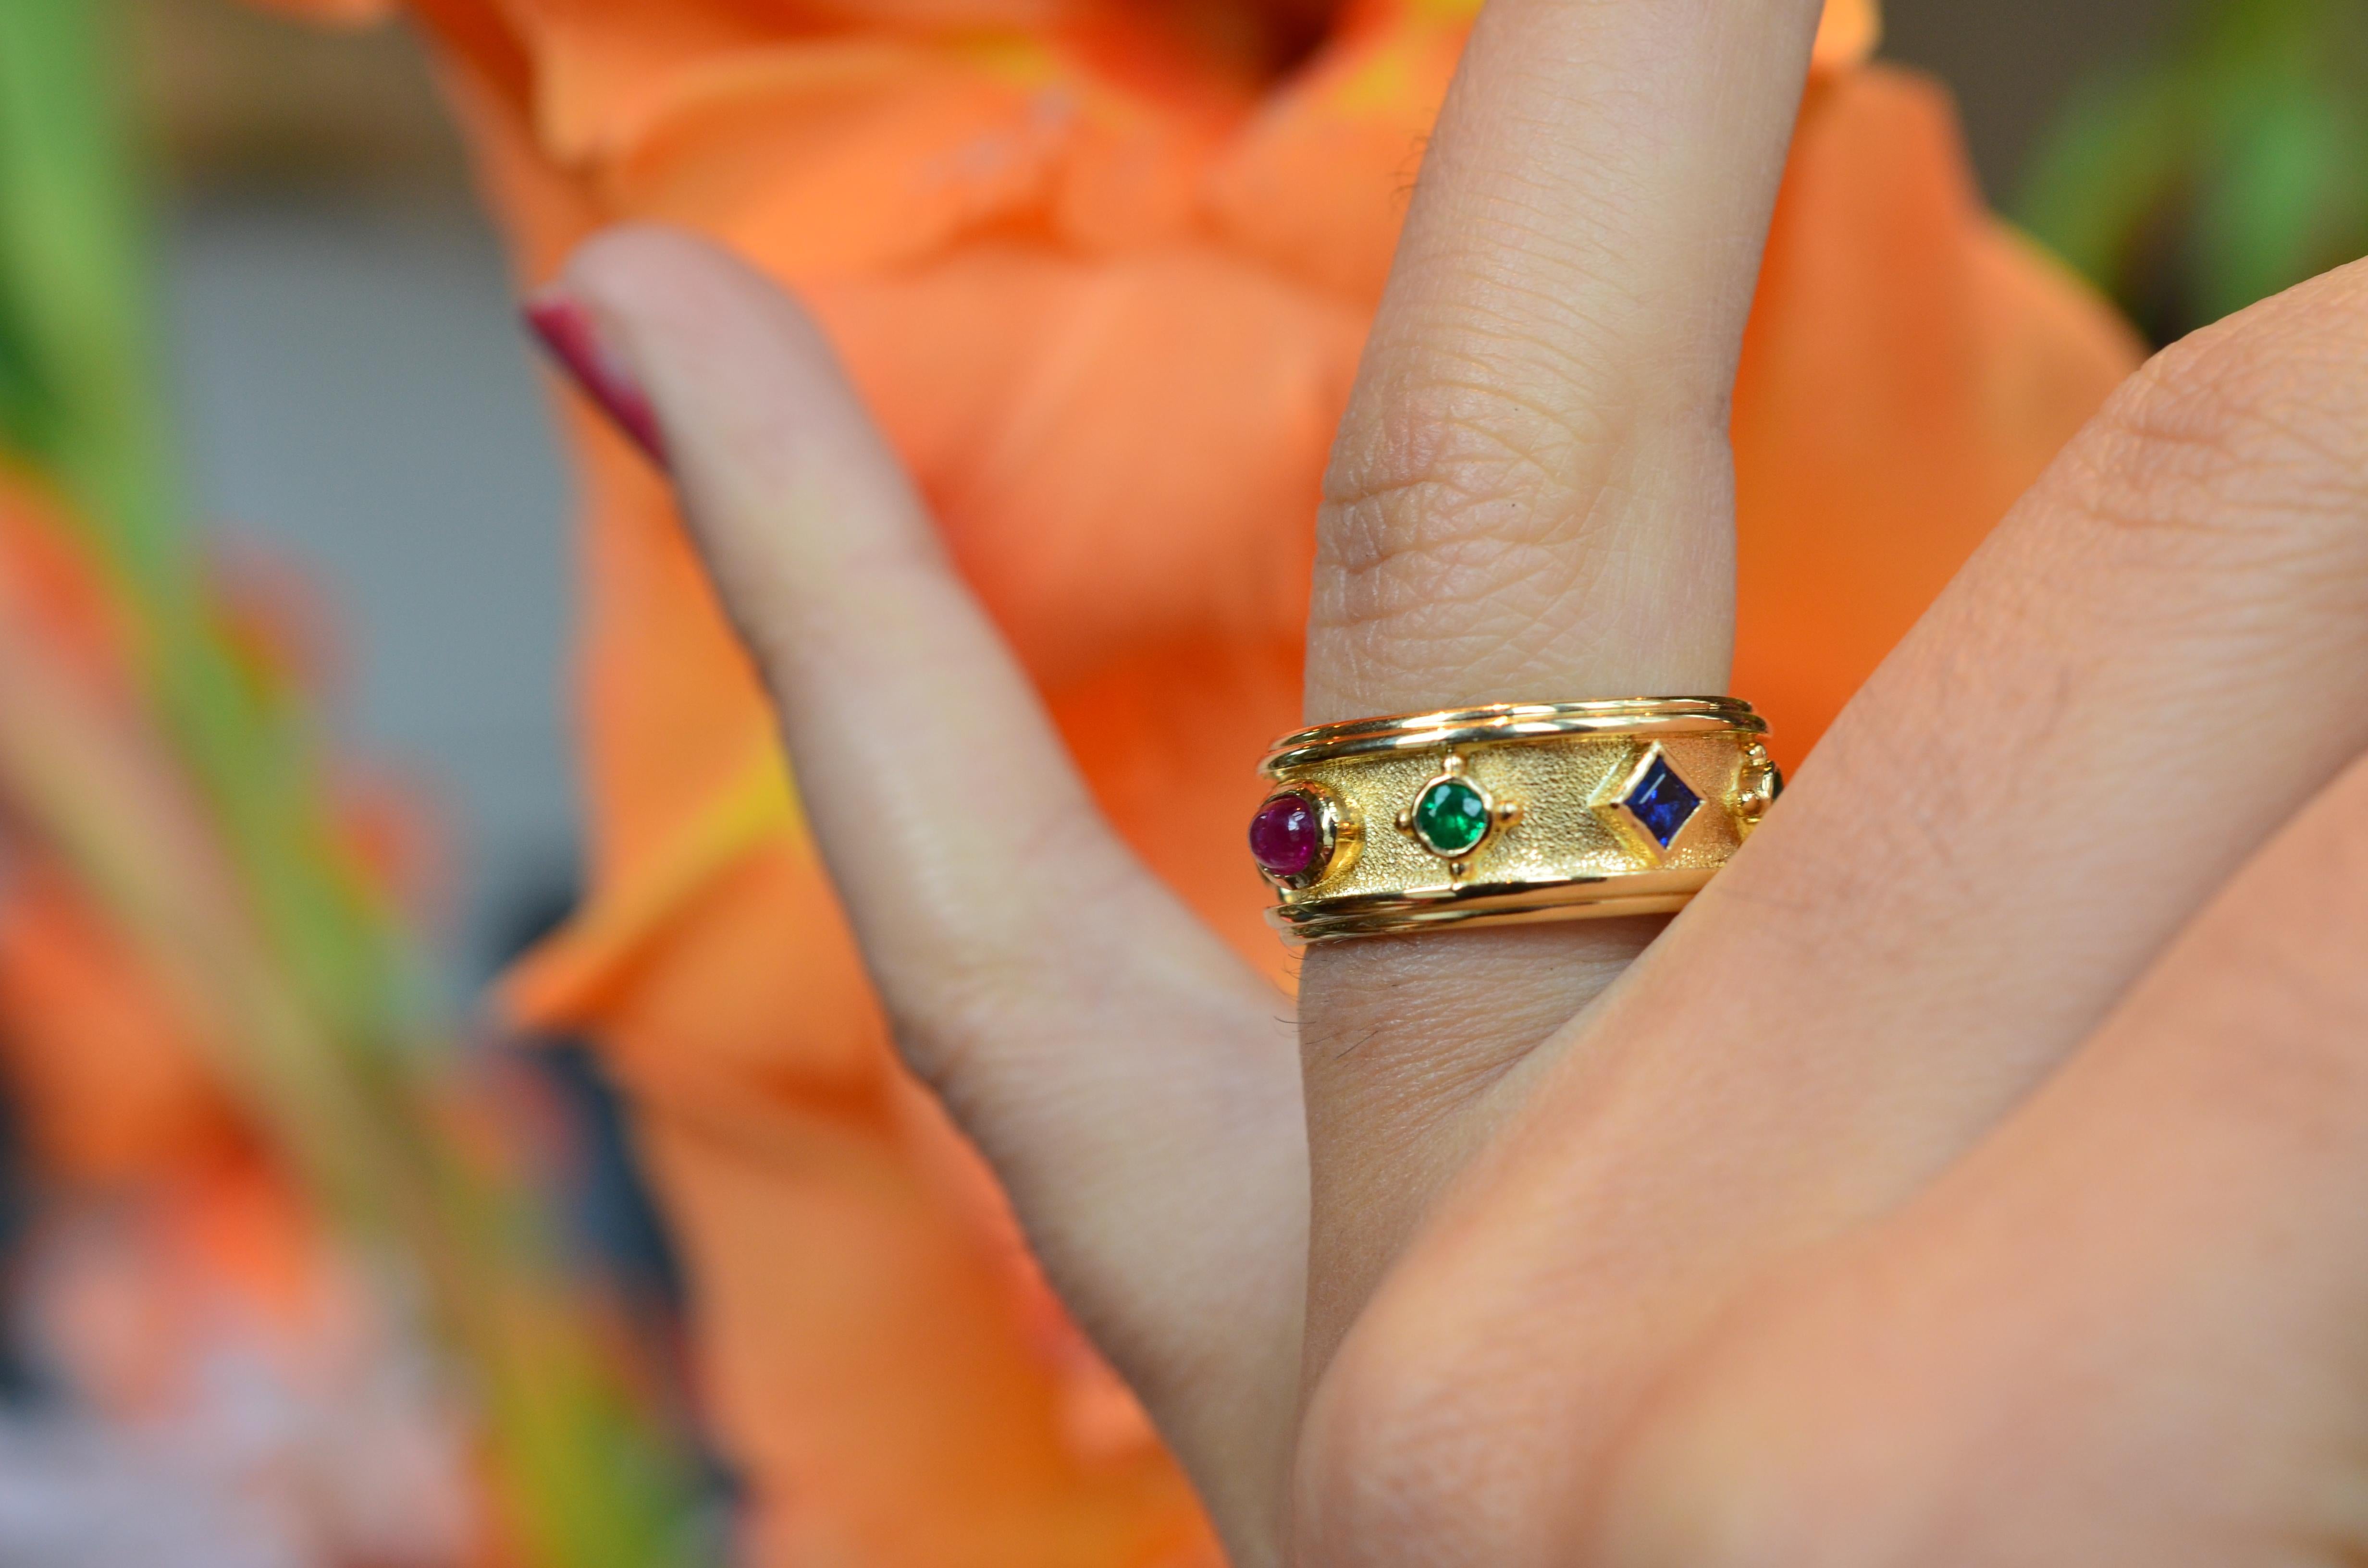 18 karat yellow gold Bonebakker band ring set with sapphires, emeralds and a ruby. 

A unique ring inspired by the Crown of the Kingdom of the Netherlands made in 1840 by the master goldsmiths of Bonebakker, an honourable commission by  King Willem